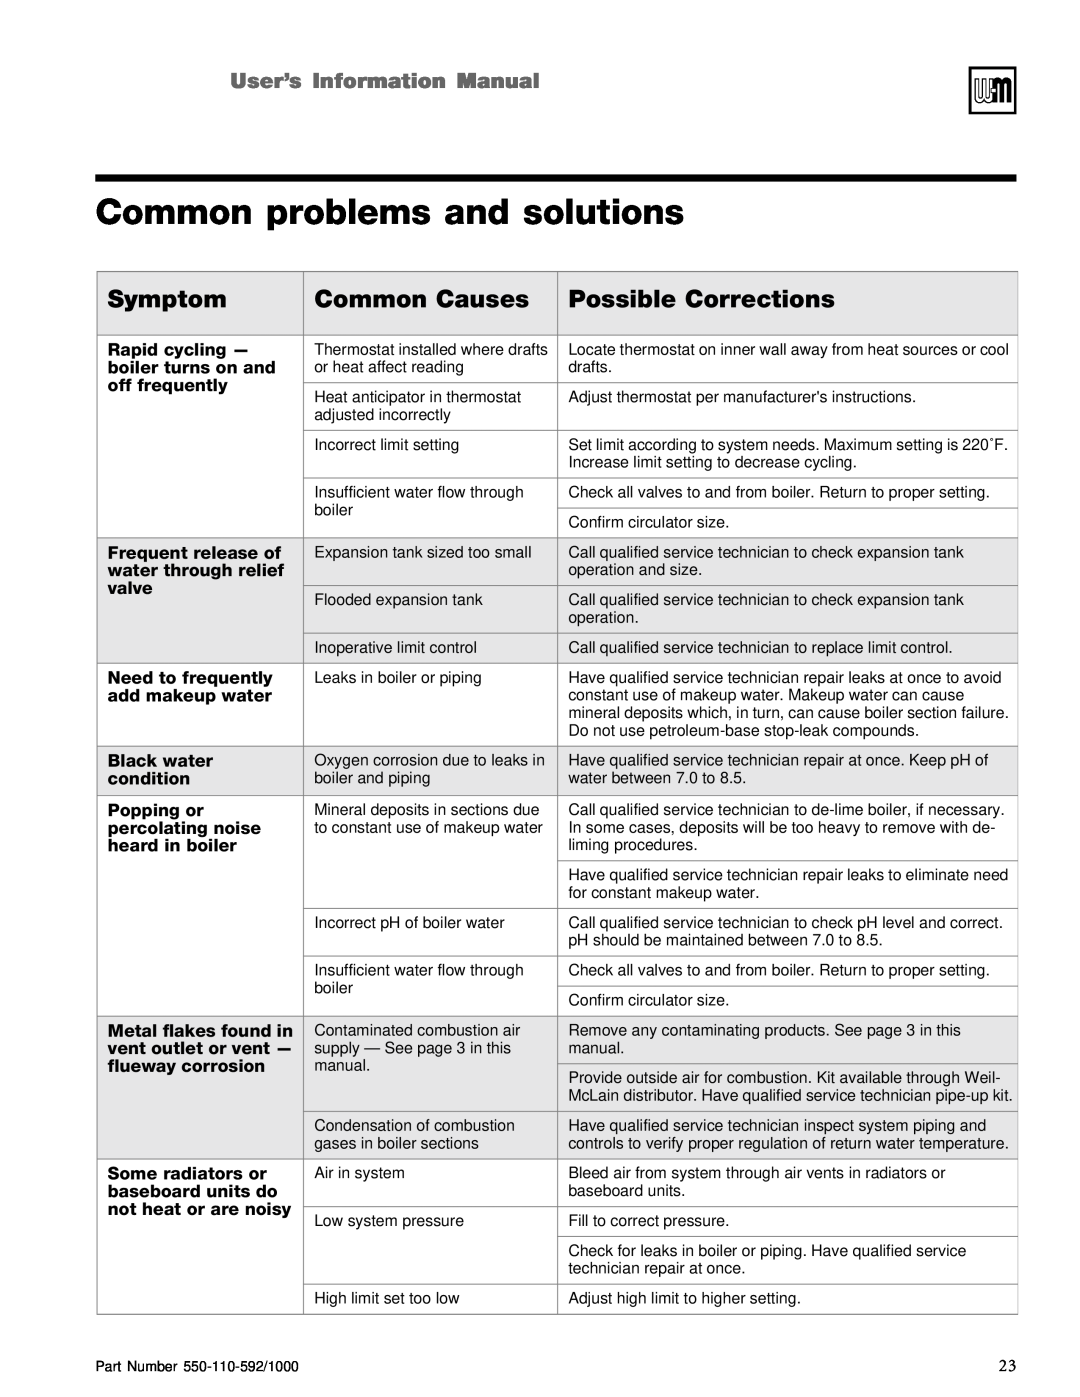 Weil-McLain EGH, PFG Common problems and solutions, Symptom, Common Causes, Possible Corrections, UserísInformationManual 